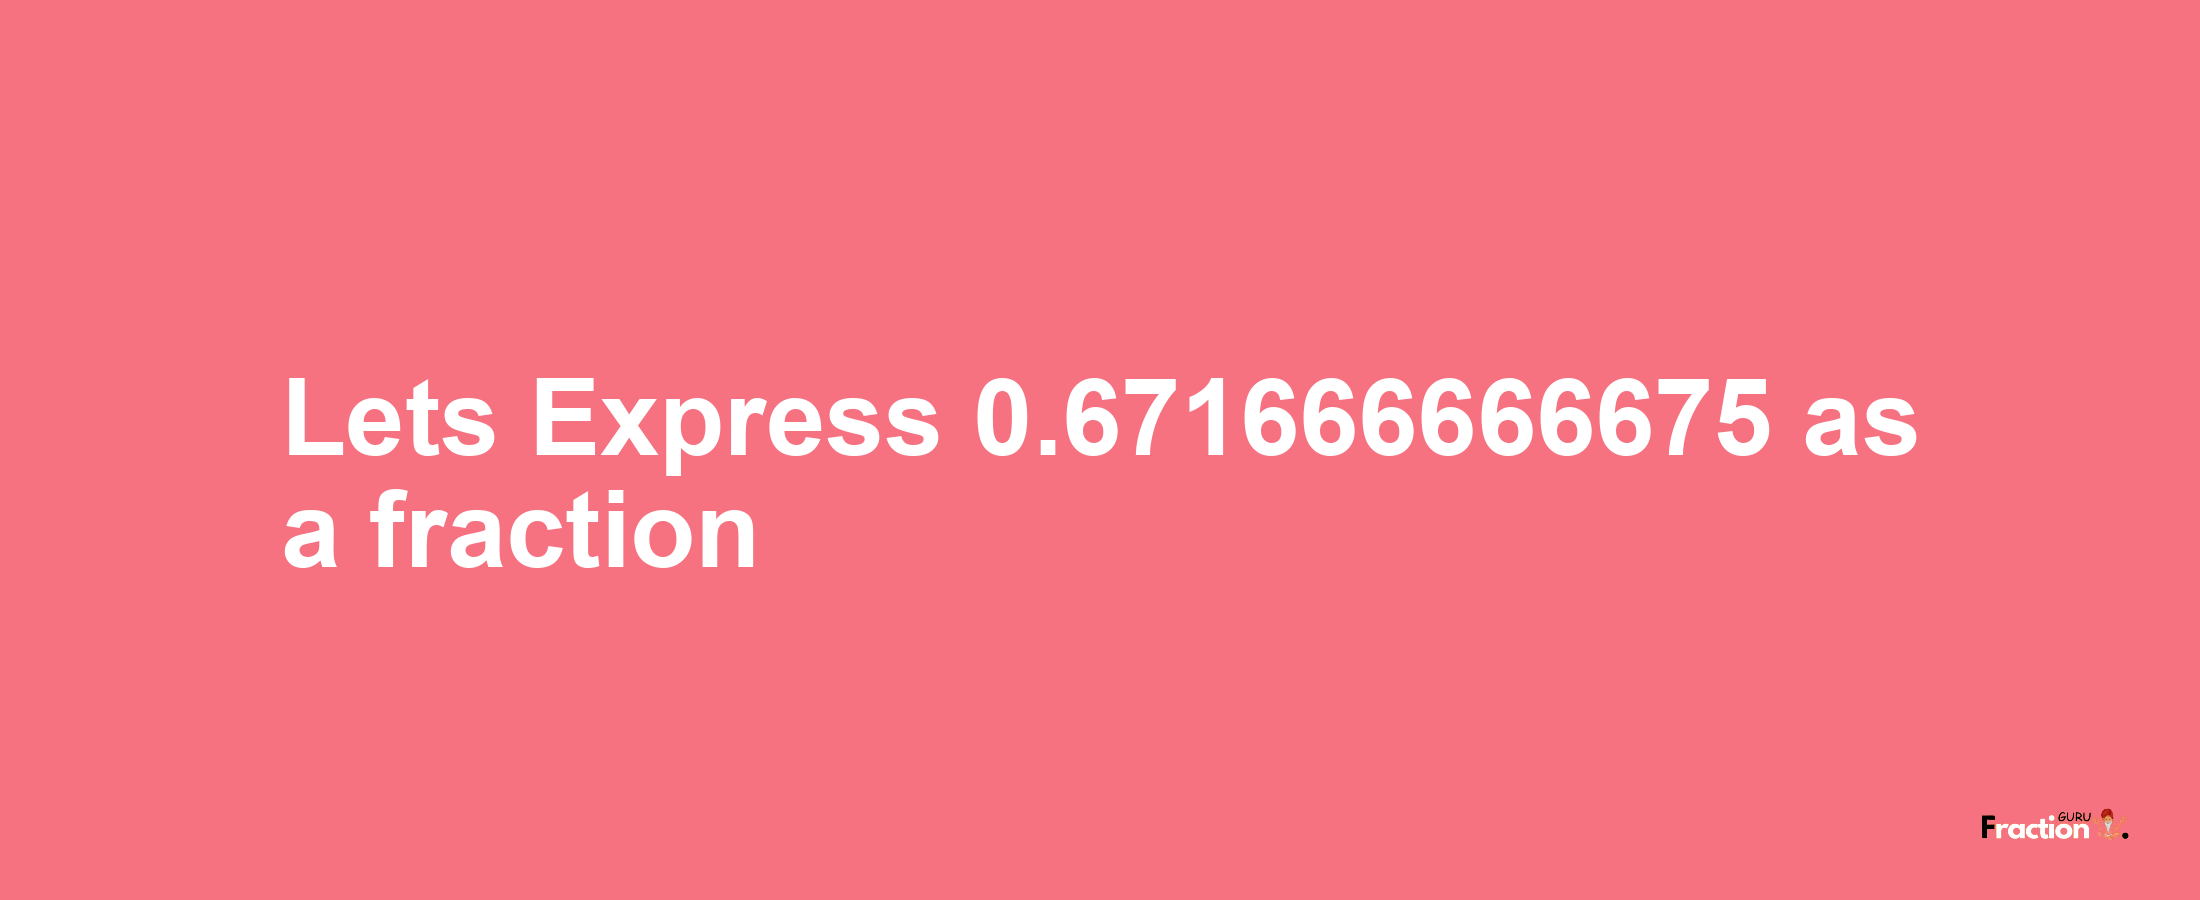 Lets Express 0.671666666675 as afraction